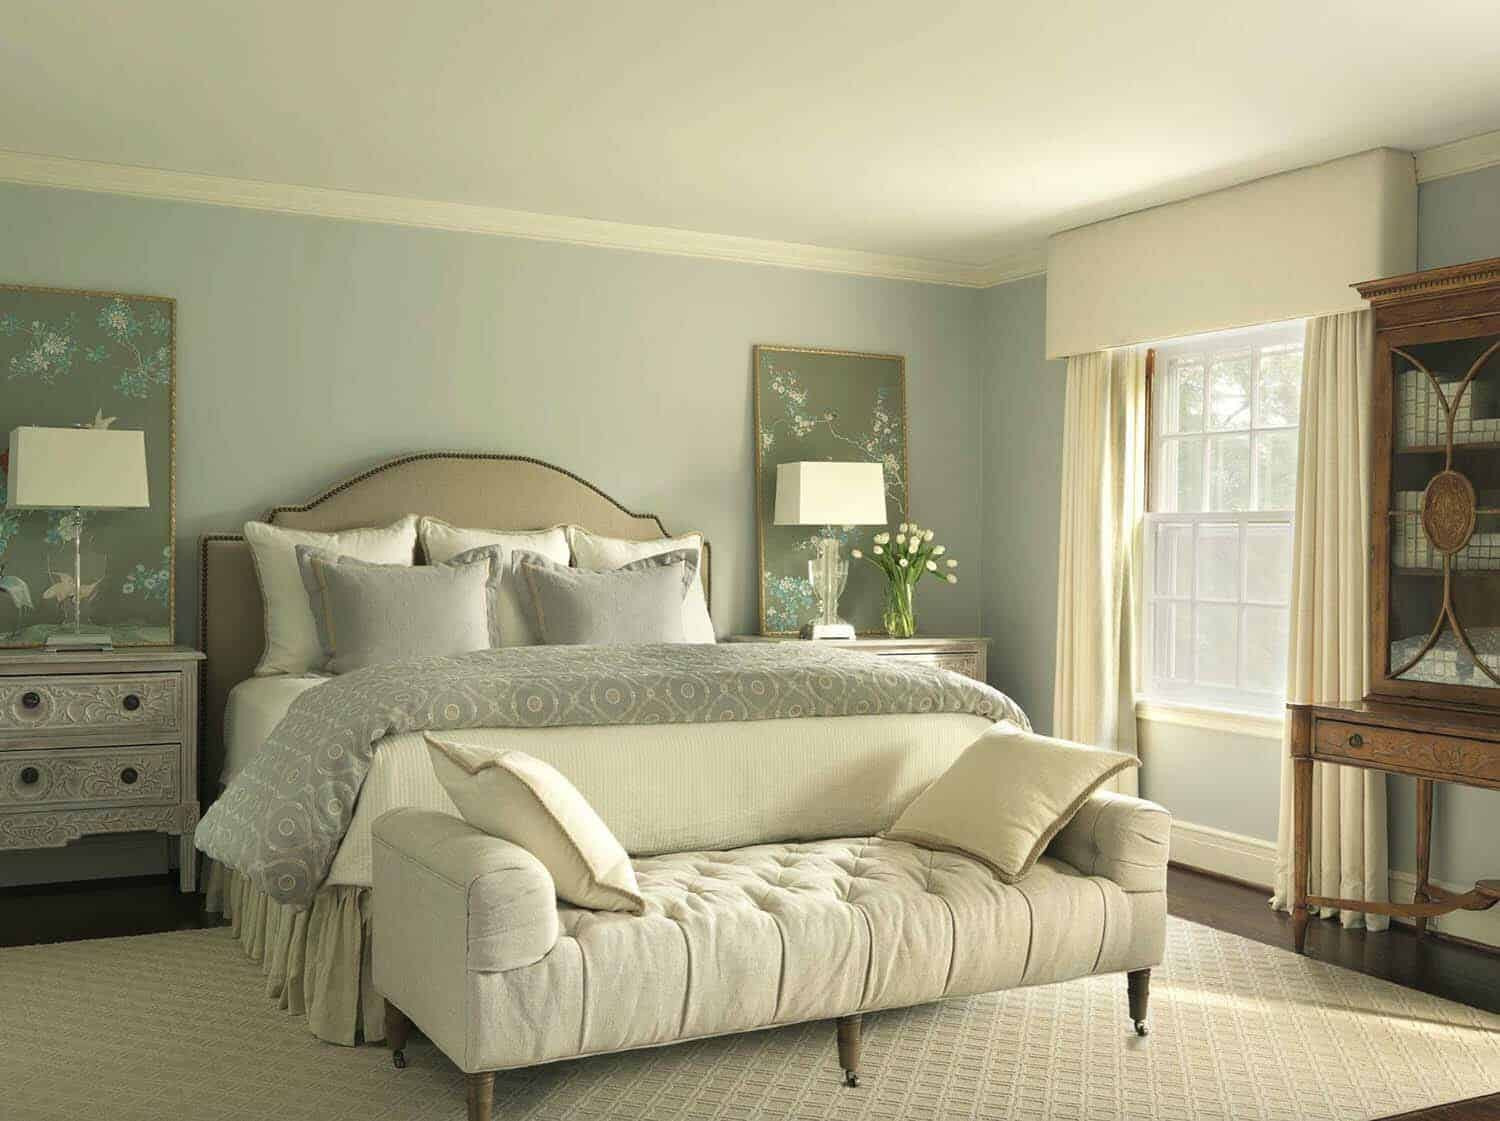 Best Colors For Master Bedroom
 25 Absolutely stunning master bedroom color scheme ideas